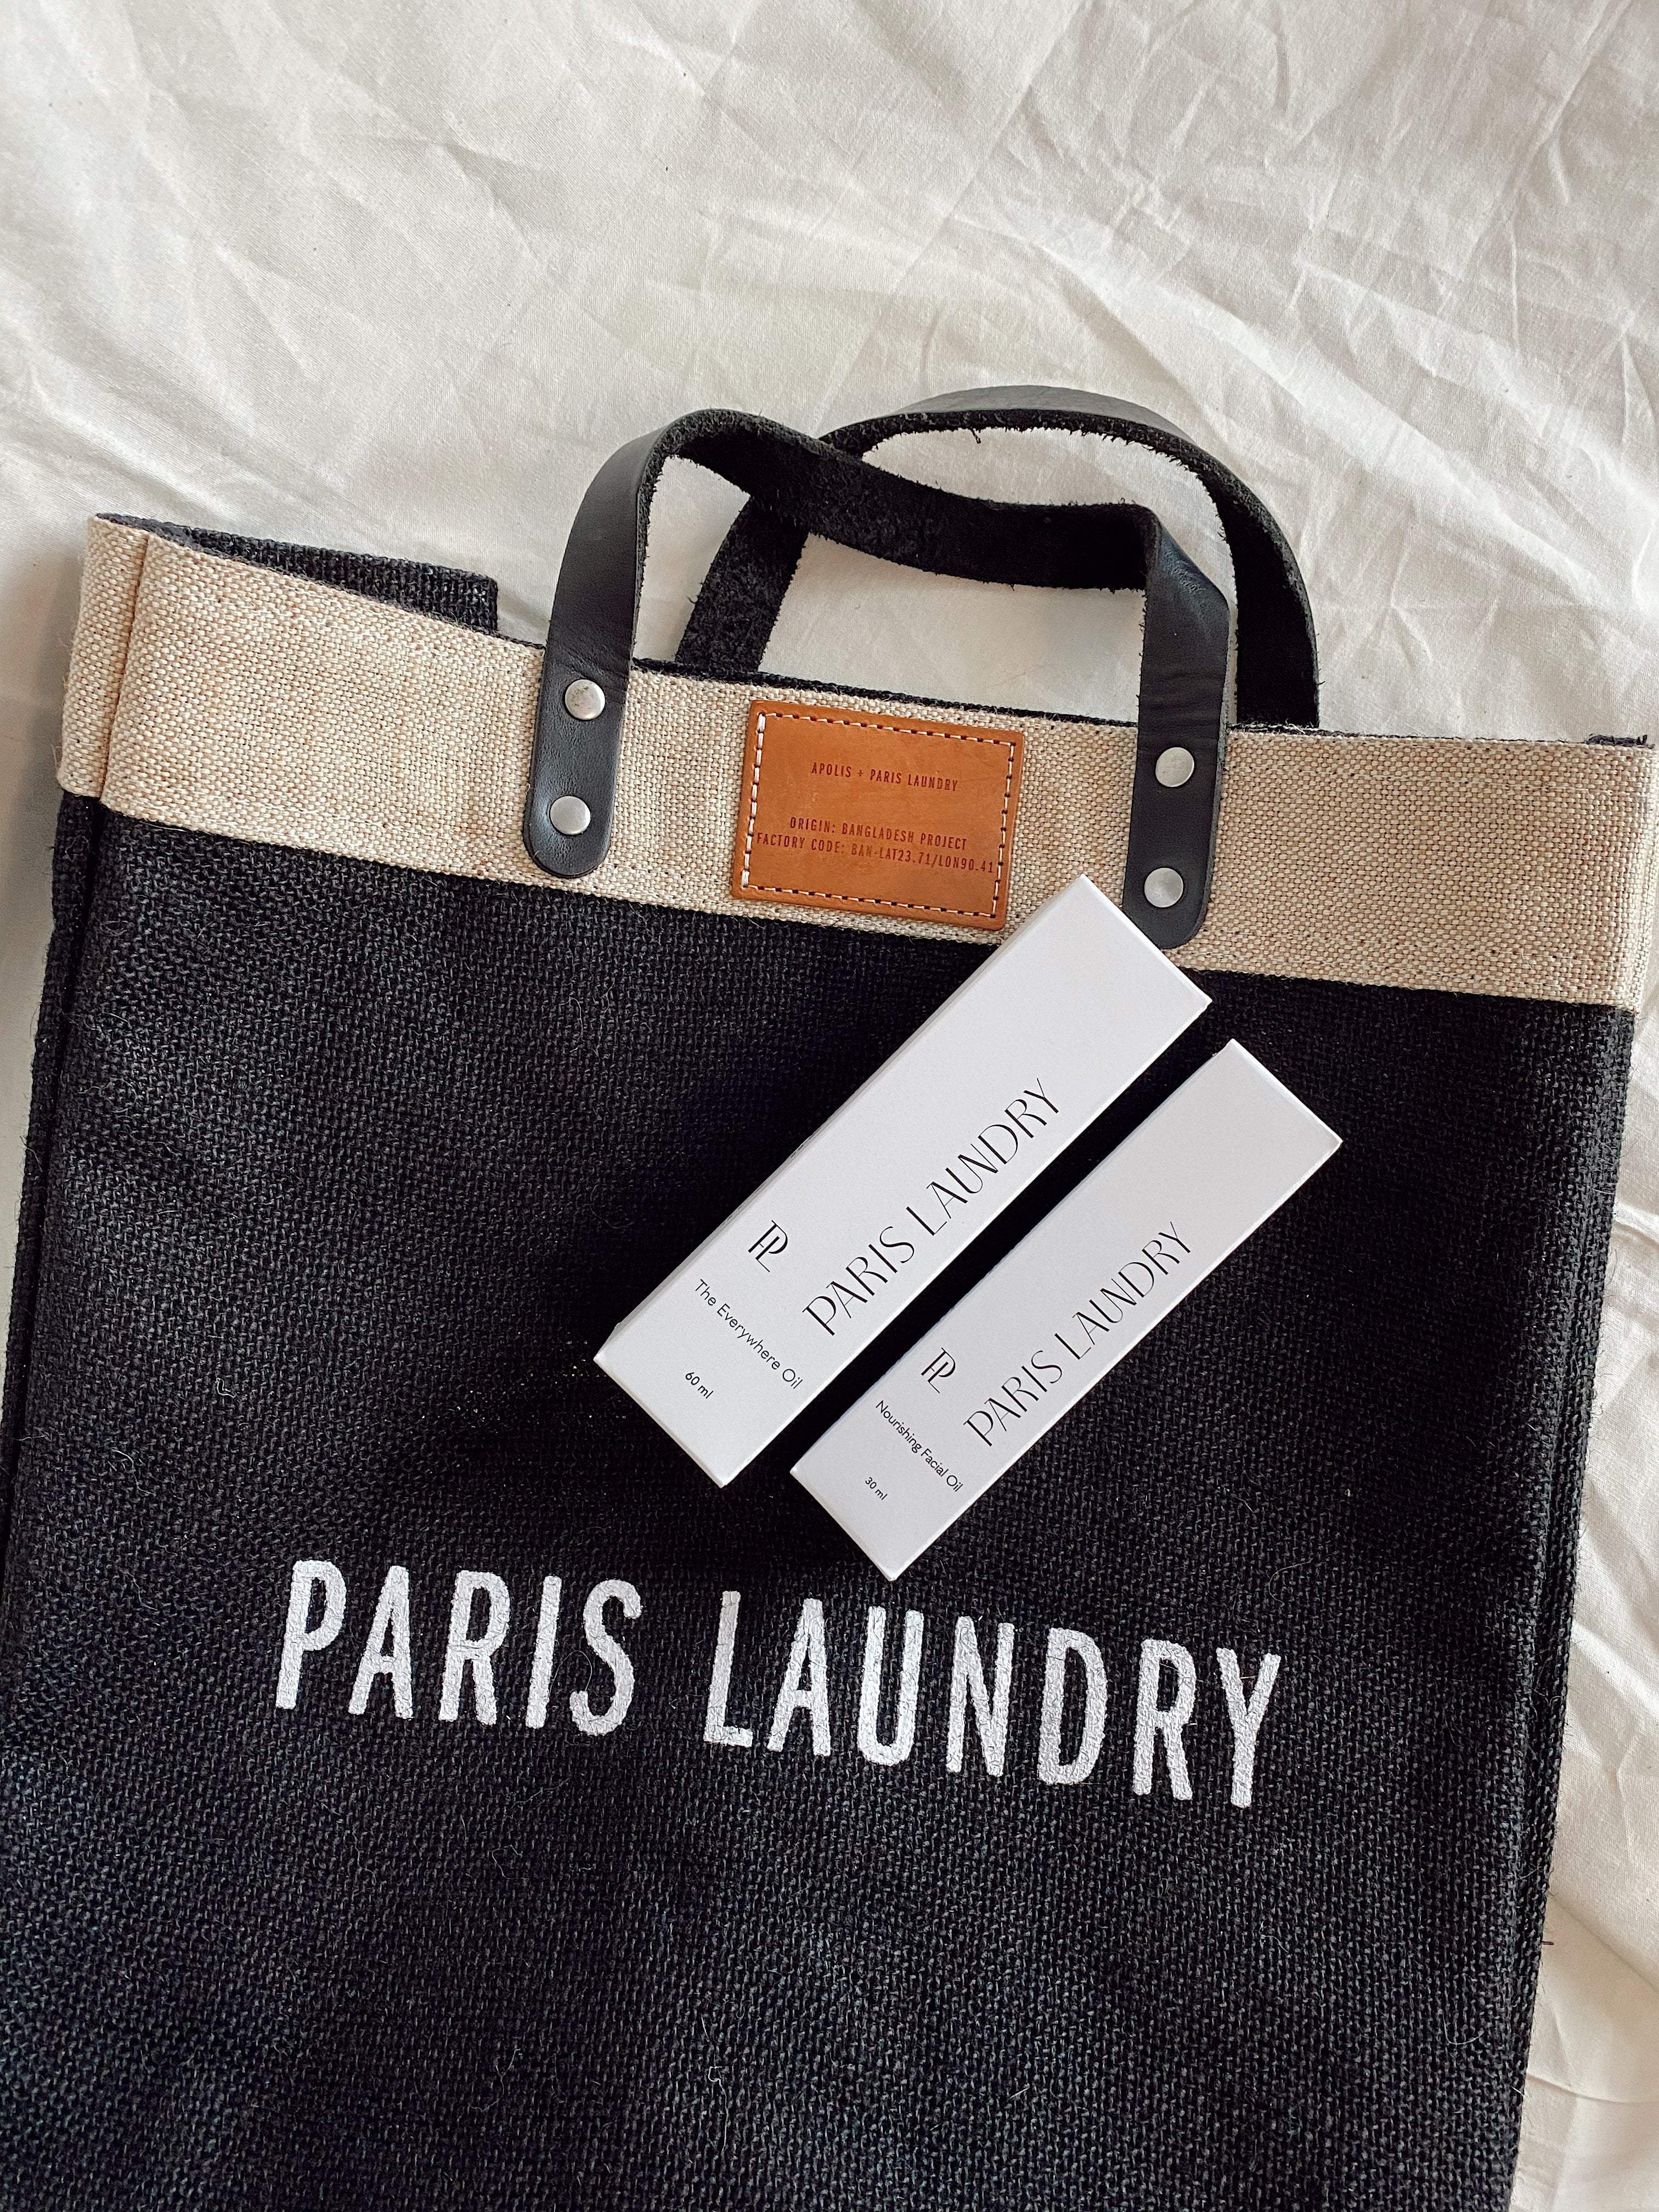 Paris Laundry Gifts & Sets Mother's Day Gift Set